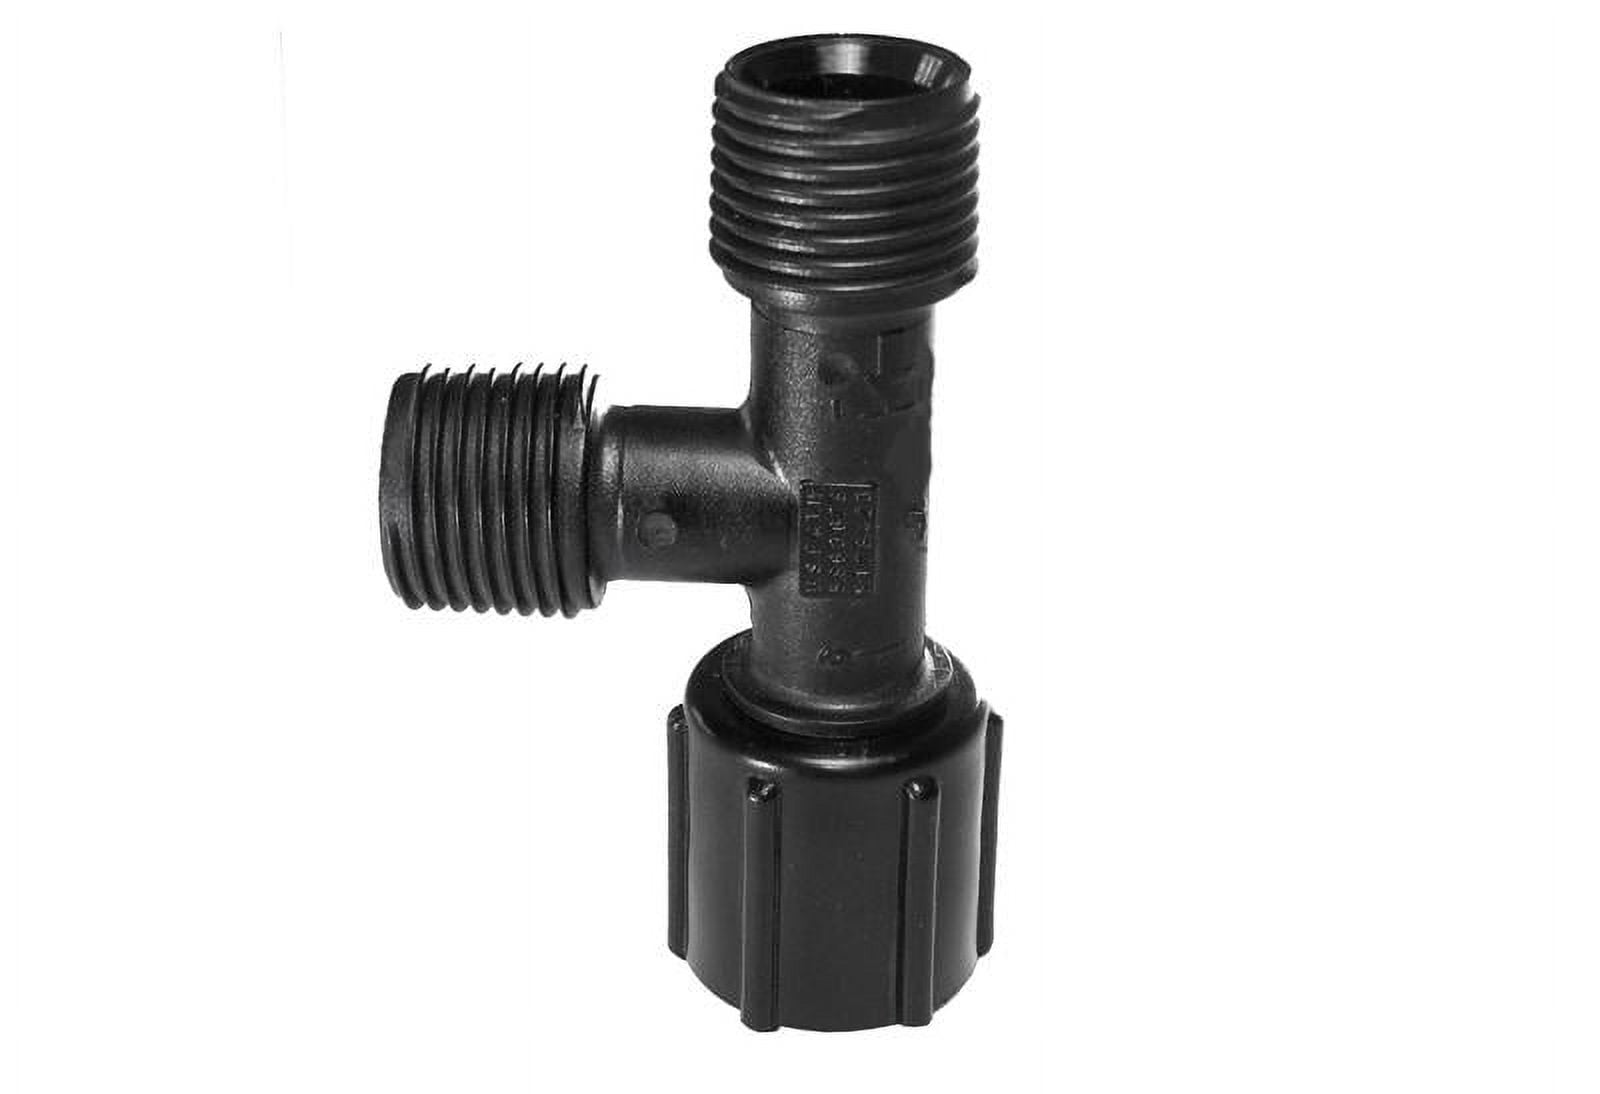 4807681 0.5 X 0.5 X 0.5 In. Dia. Flair-it Mpt To Bsp Swivel To Mpt Pex Stacking Manifold Tee